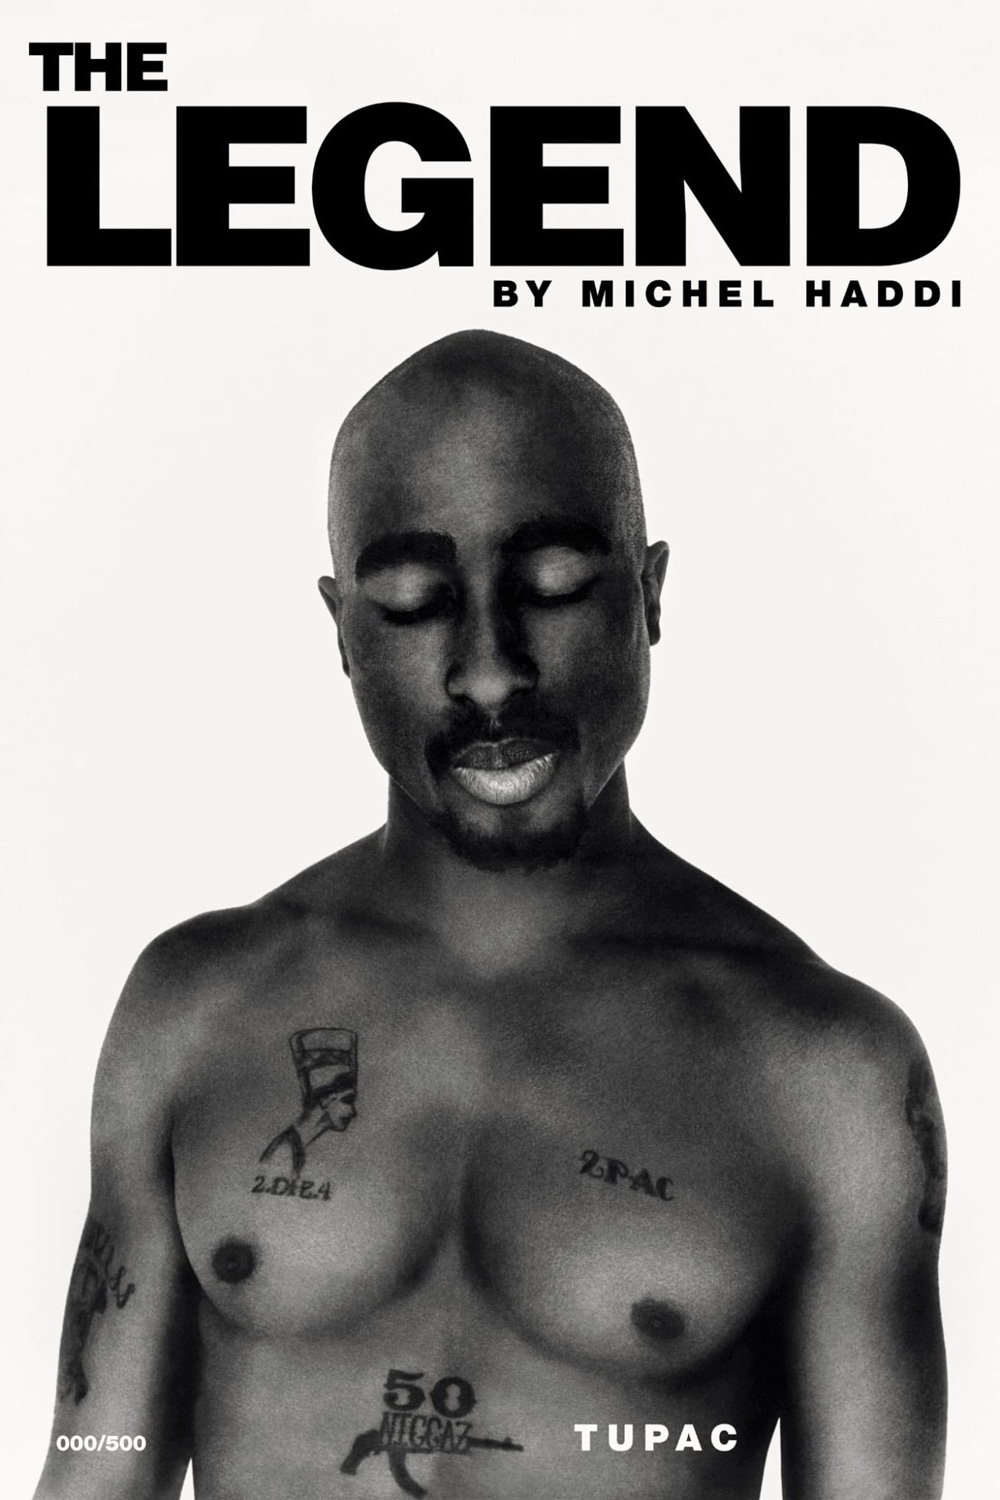 Tupac: The Legend Photo Book Released By French-Algerian Photographer